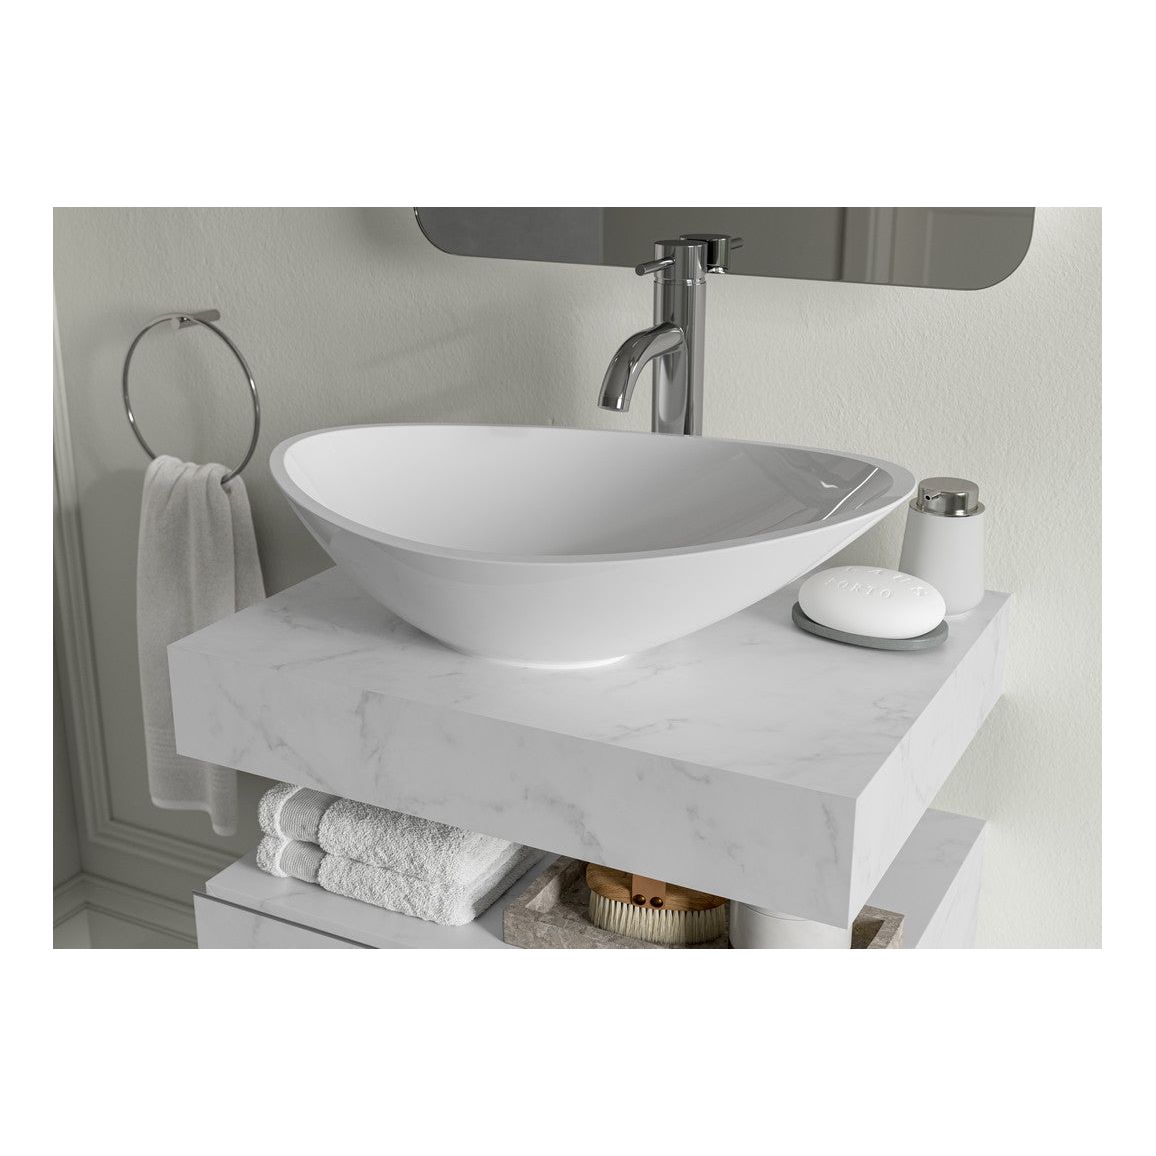 Hayes 800mm Wall Hung Basin Shelf - White Marble